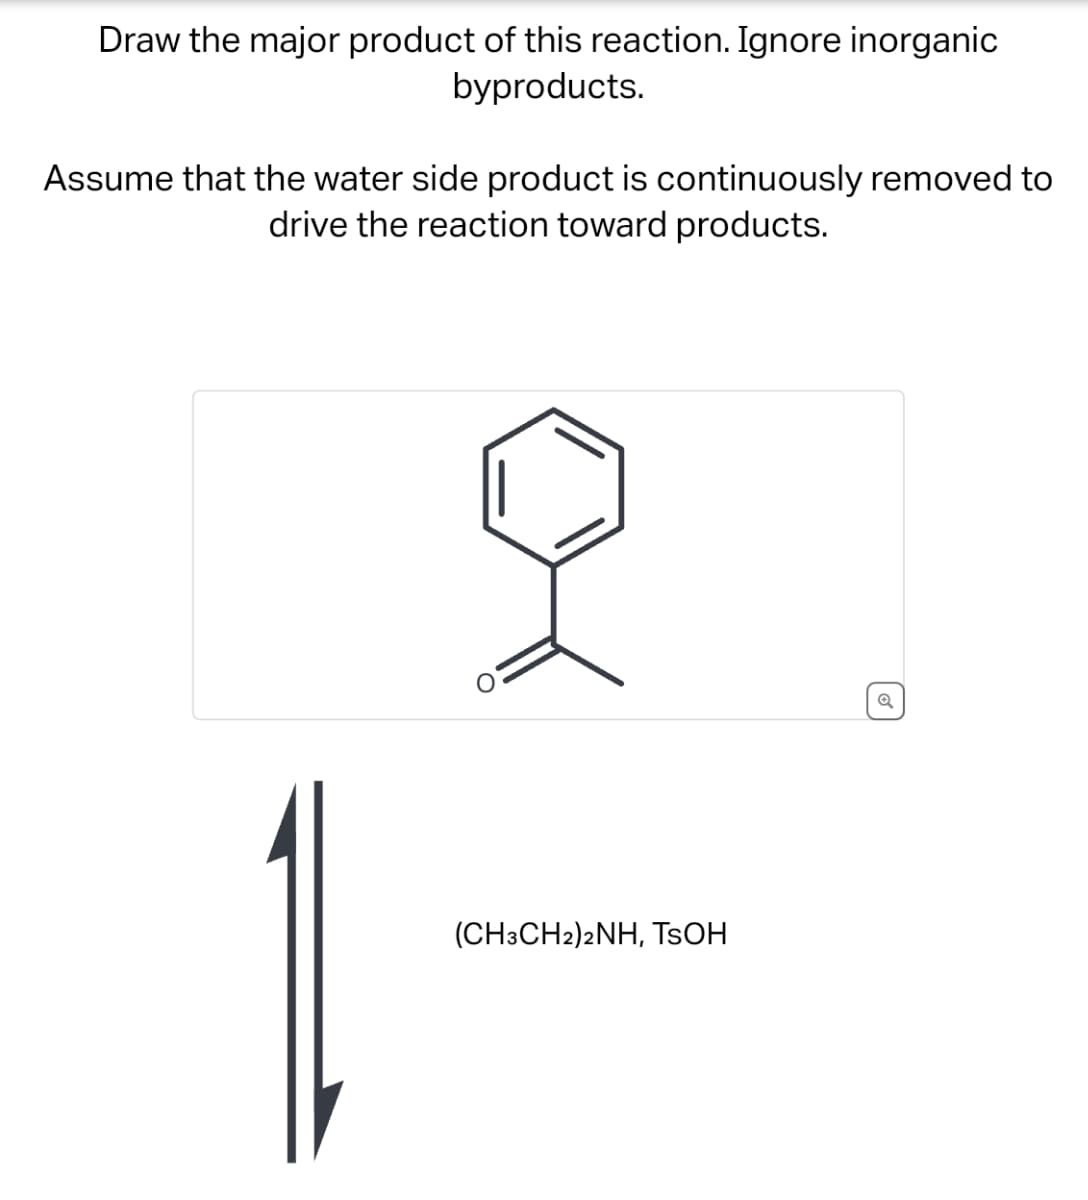 Draw the major product of this reaction. Ignore inorganic
byproducts.
Assume that the water side product is continuously removed to
drive the reaction toward products.
O
(CH3CH2)2NH, TSOH
✔